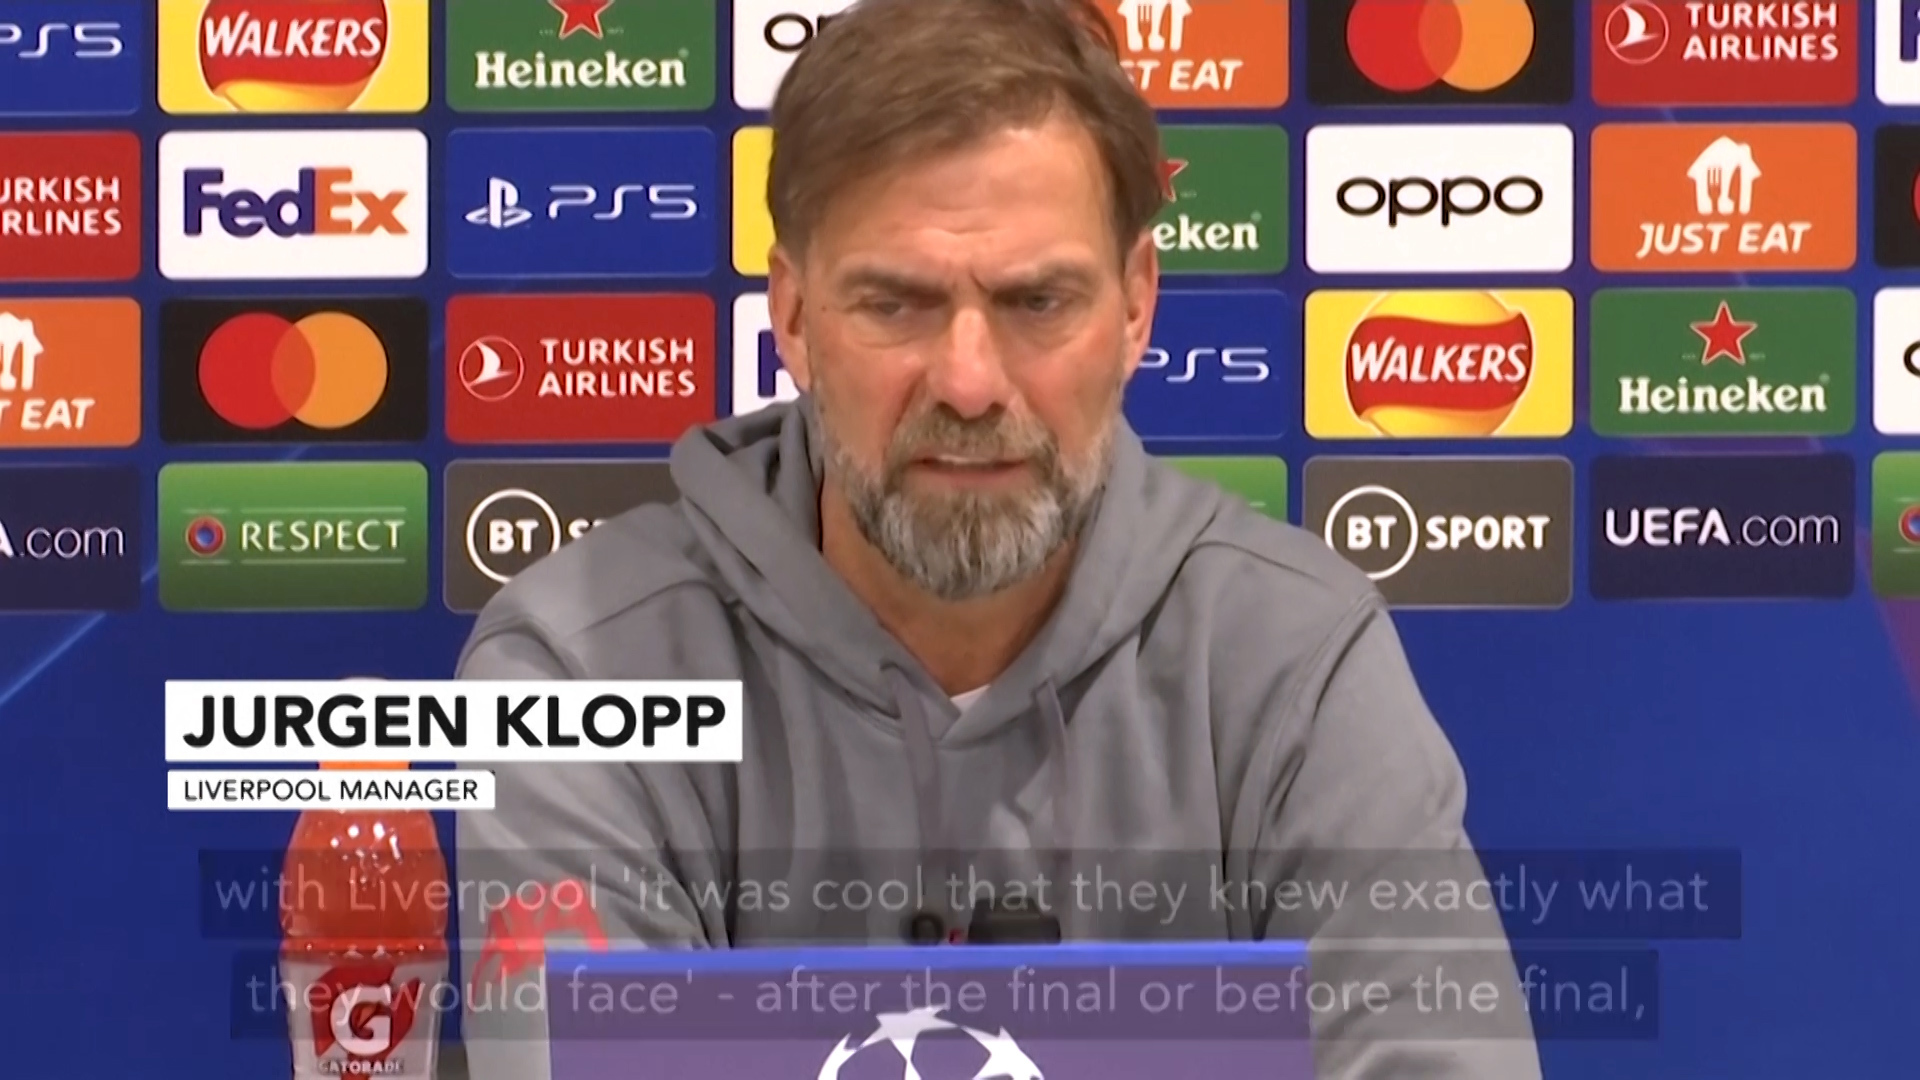 Klopp: "We should have won 2022 UCL final against Real Madrid"